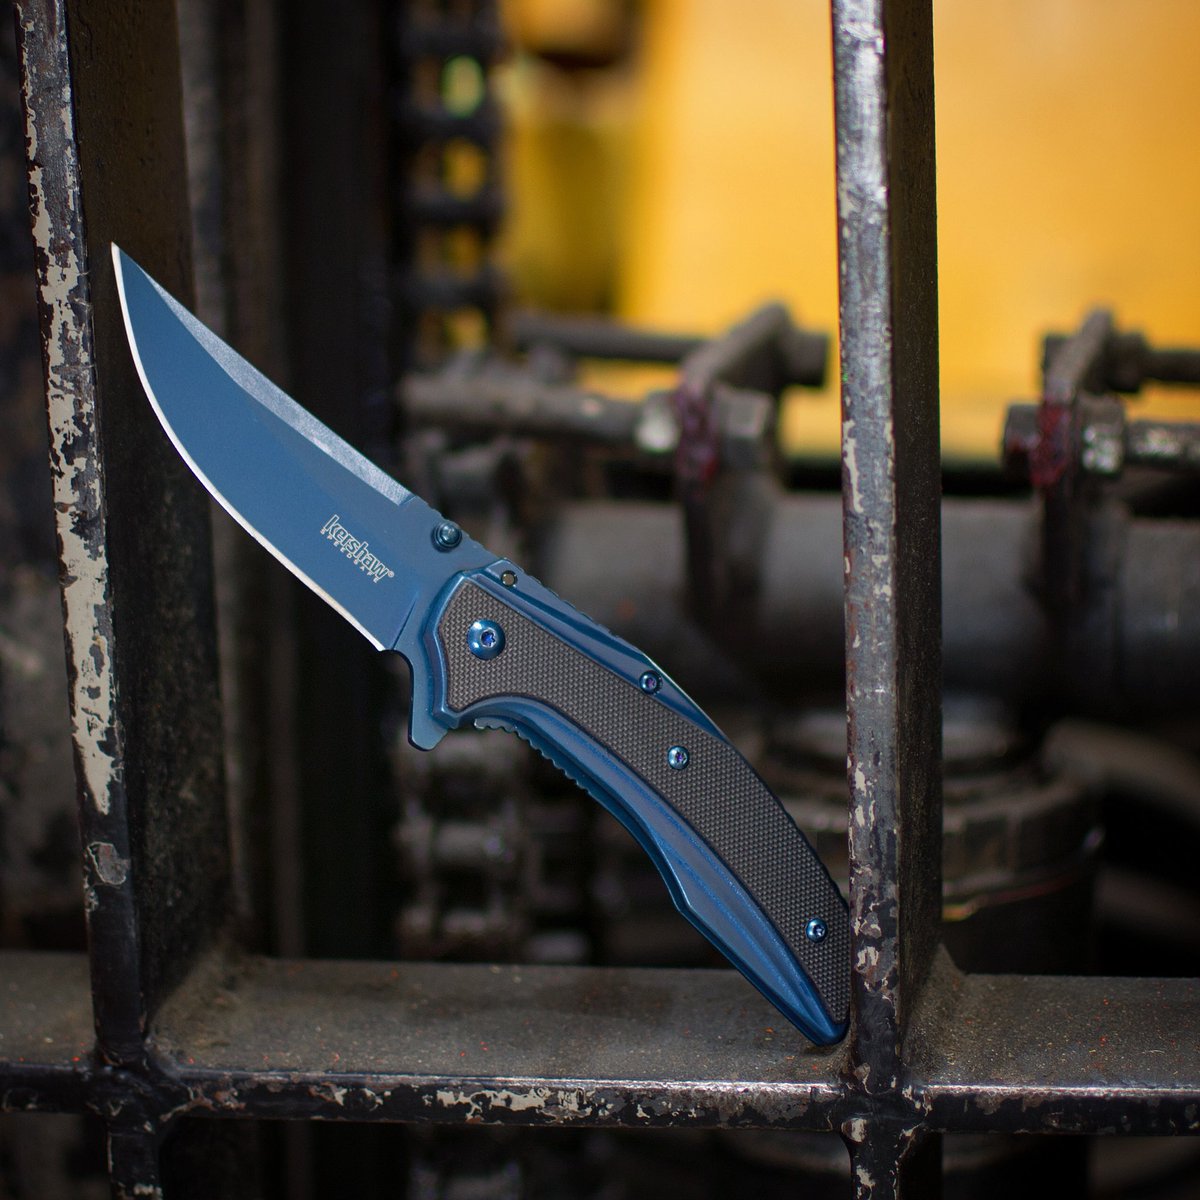 The out of sight Outright is now available!

kershaw.kaiusaltd.com/knives/knife/o…

#whatareyoucarrying #kershawoutright #edc #forklift #warehouse #beepbeep #newknife #thatblue